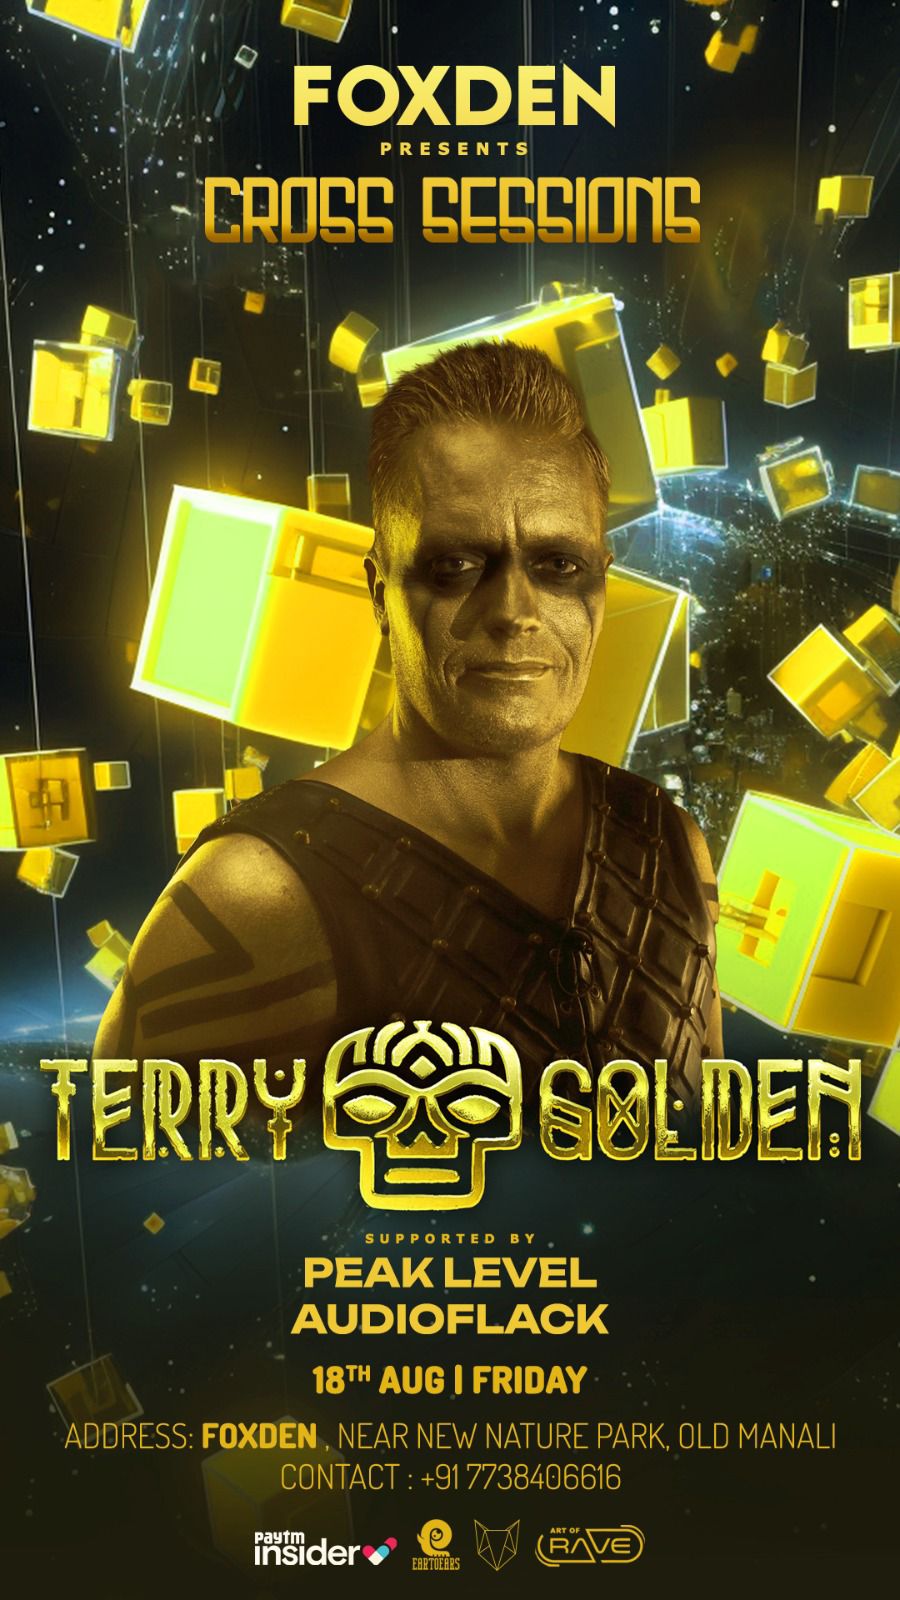 Get Ready for an Electrifying Experience: Terry Golden Takes His Powerful Music to India